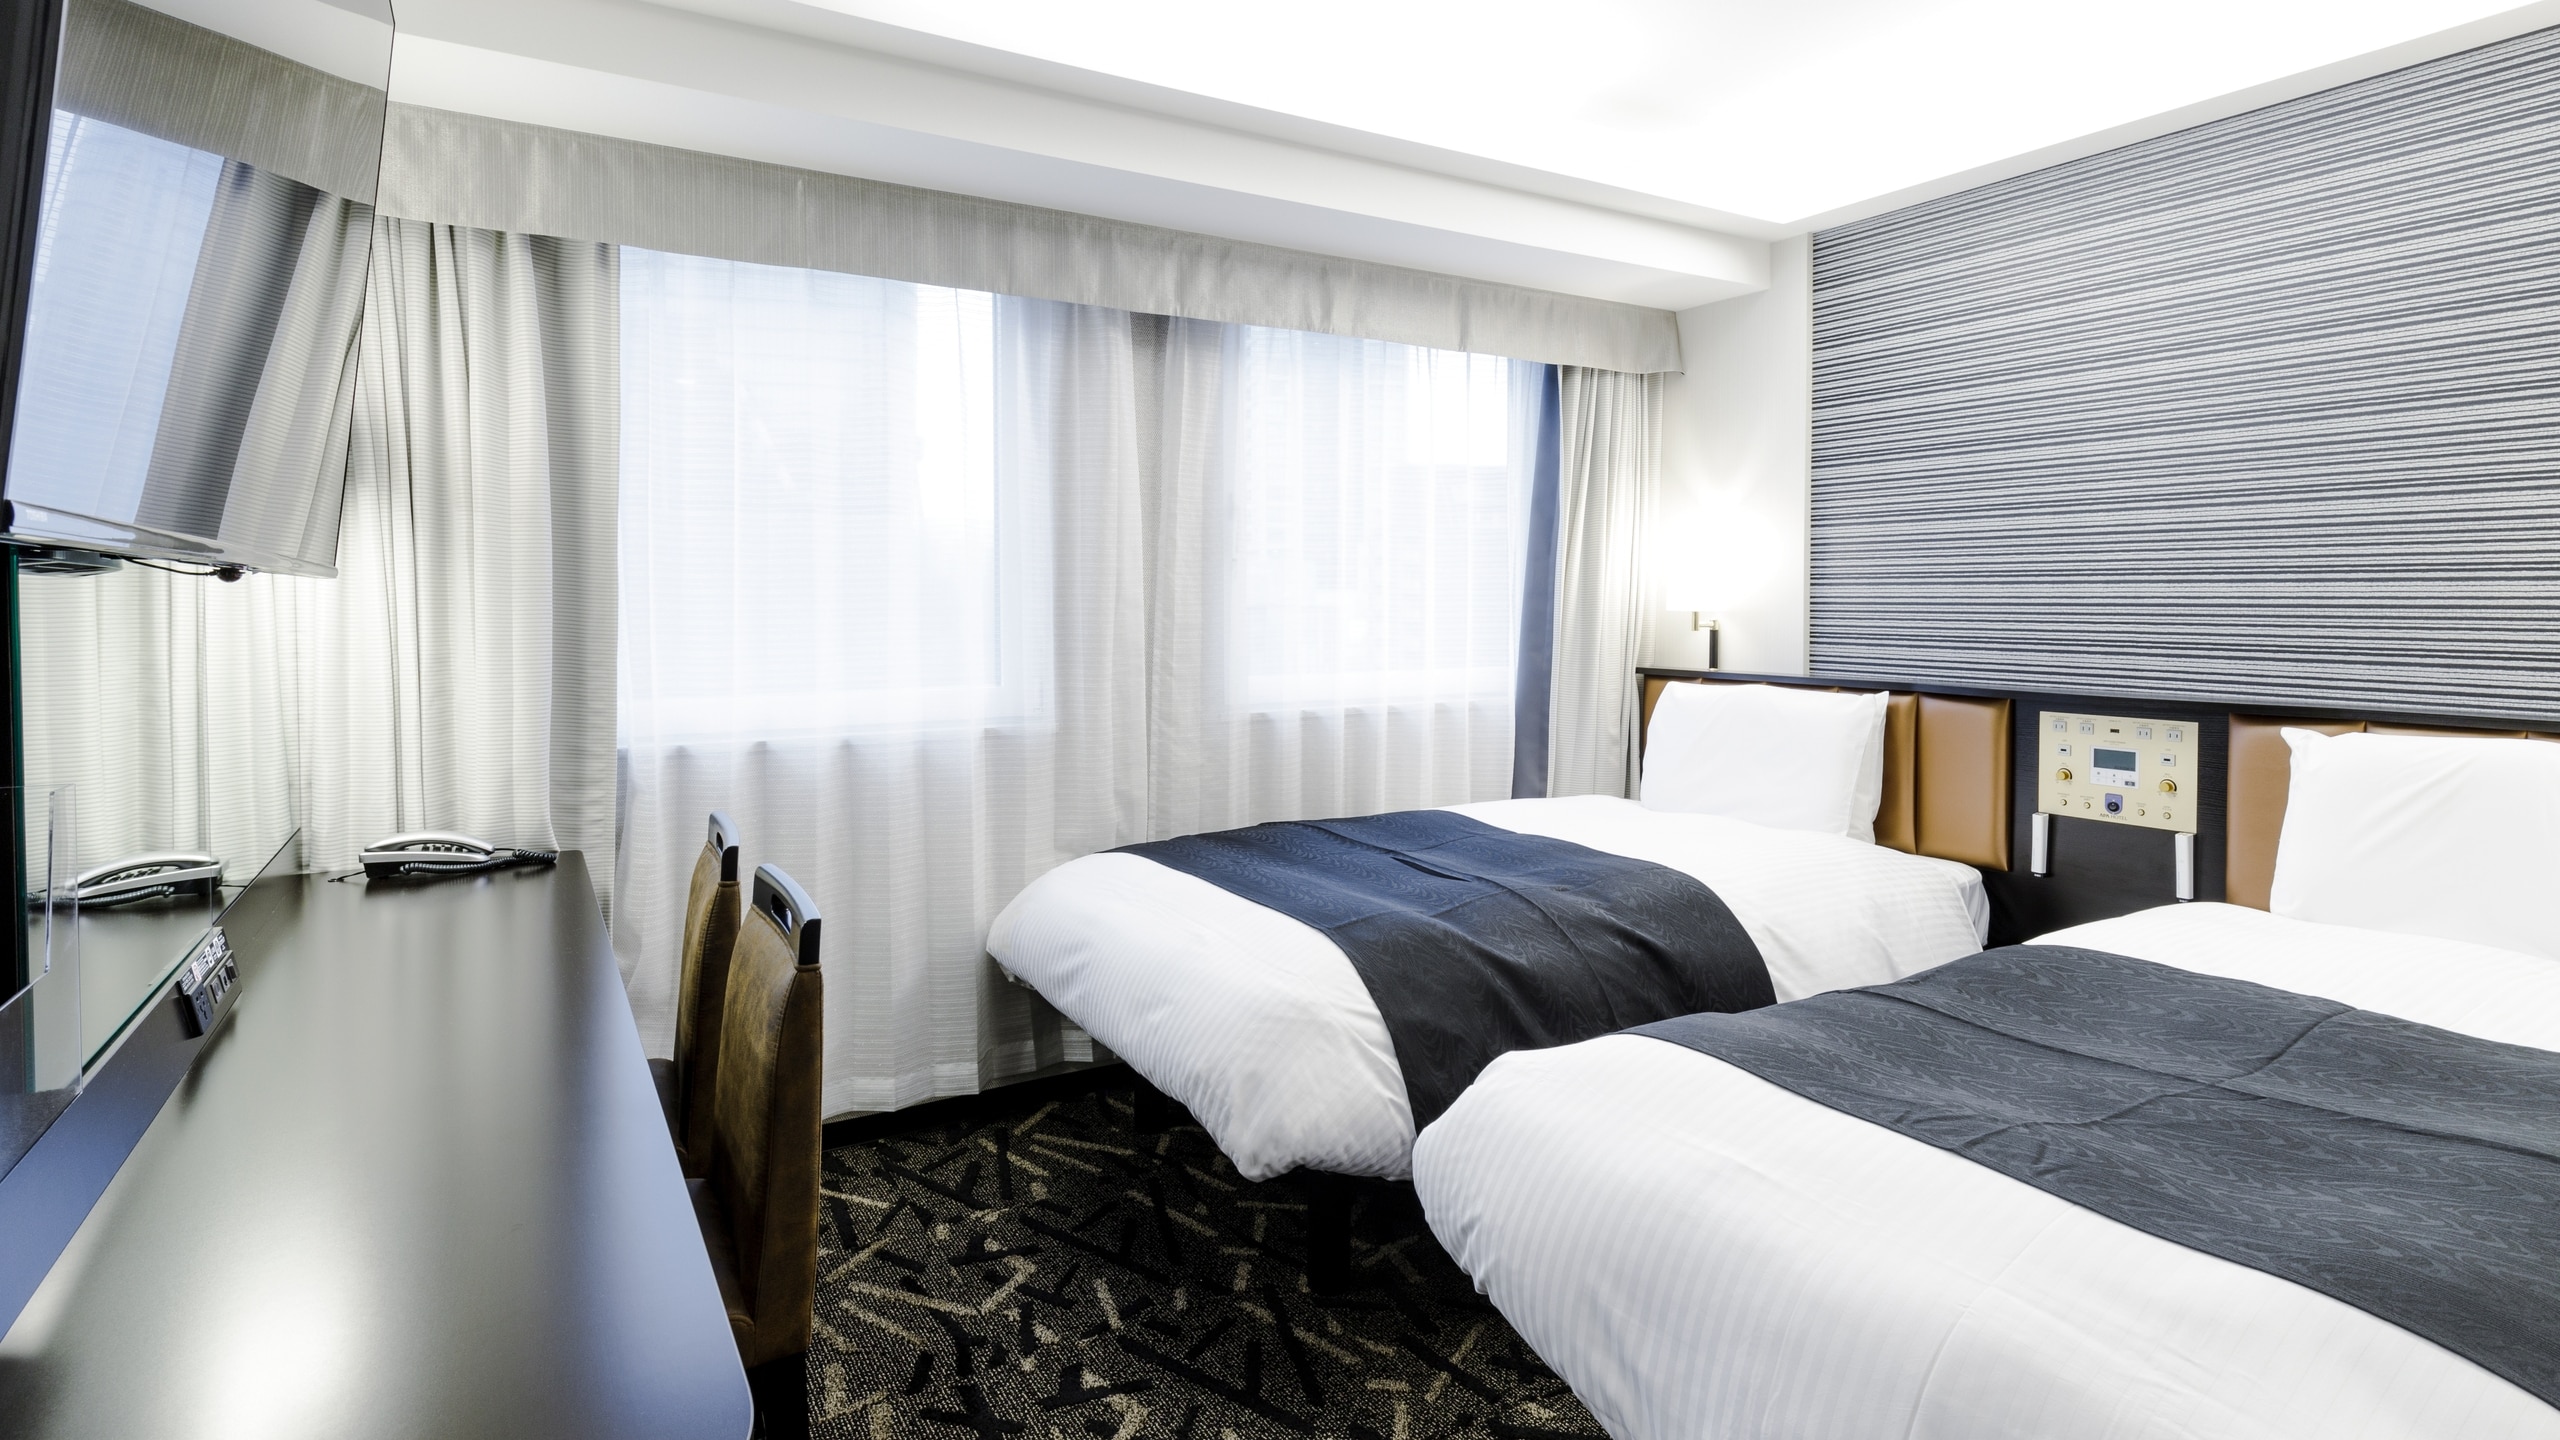 Hotel information and reservations for APA Hotel & Resort Roppongi